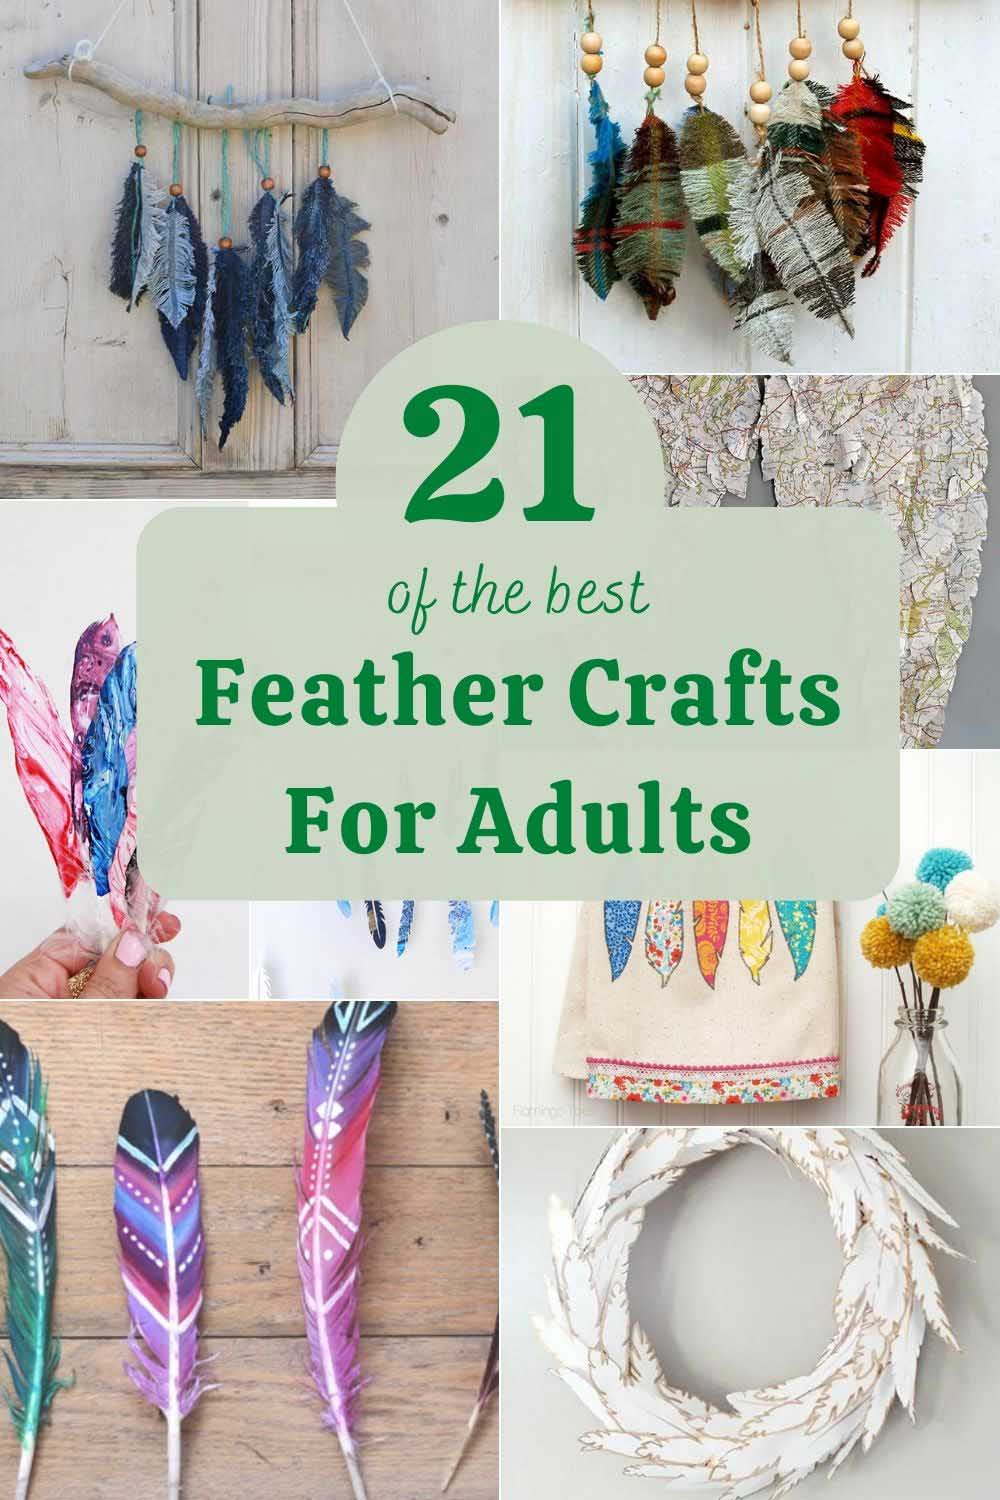 21 feather crafts for adults pin